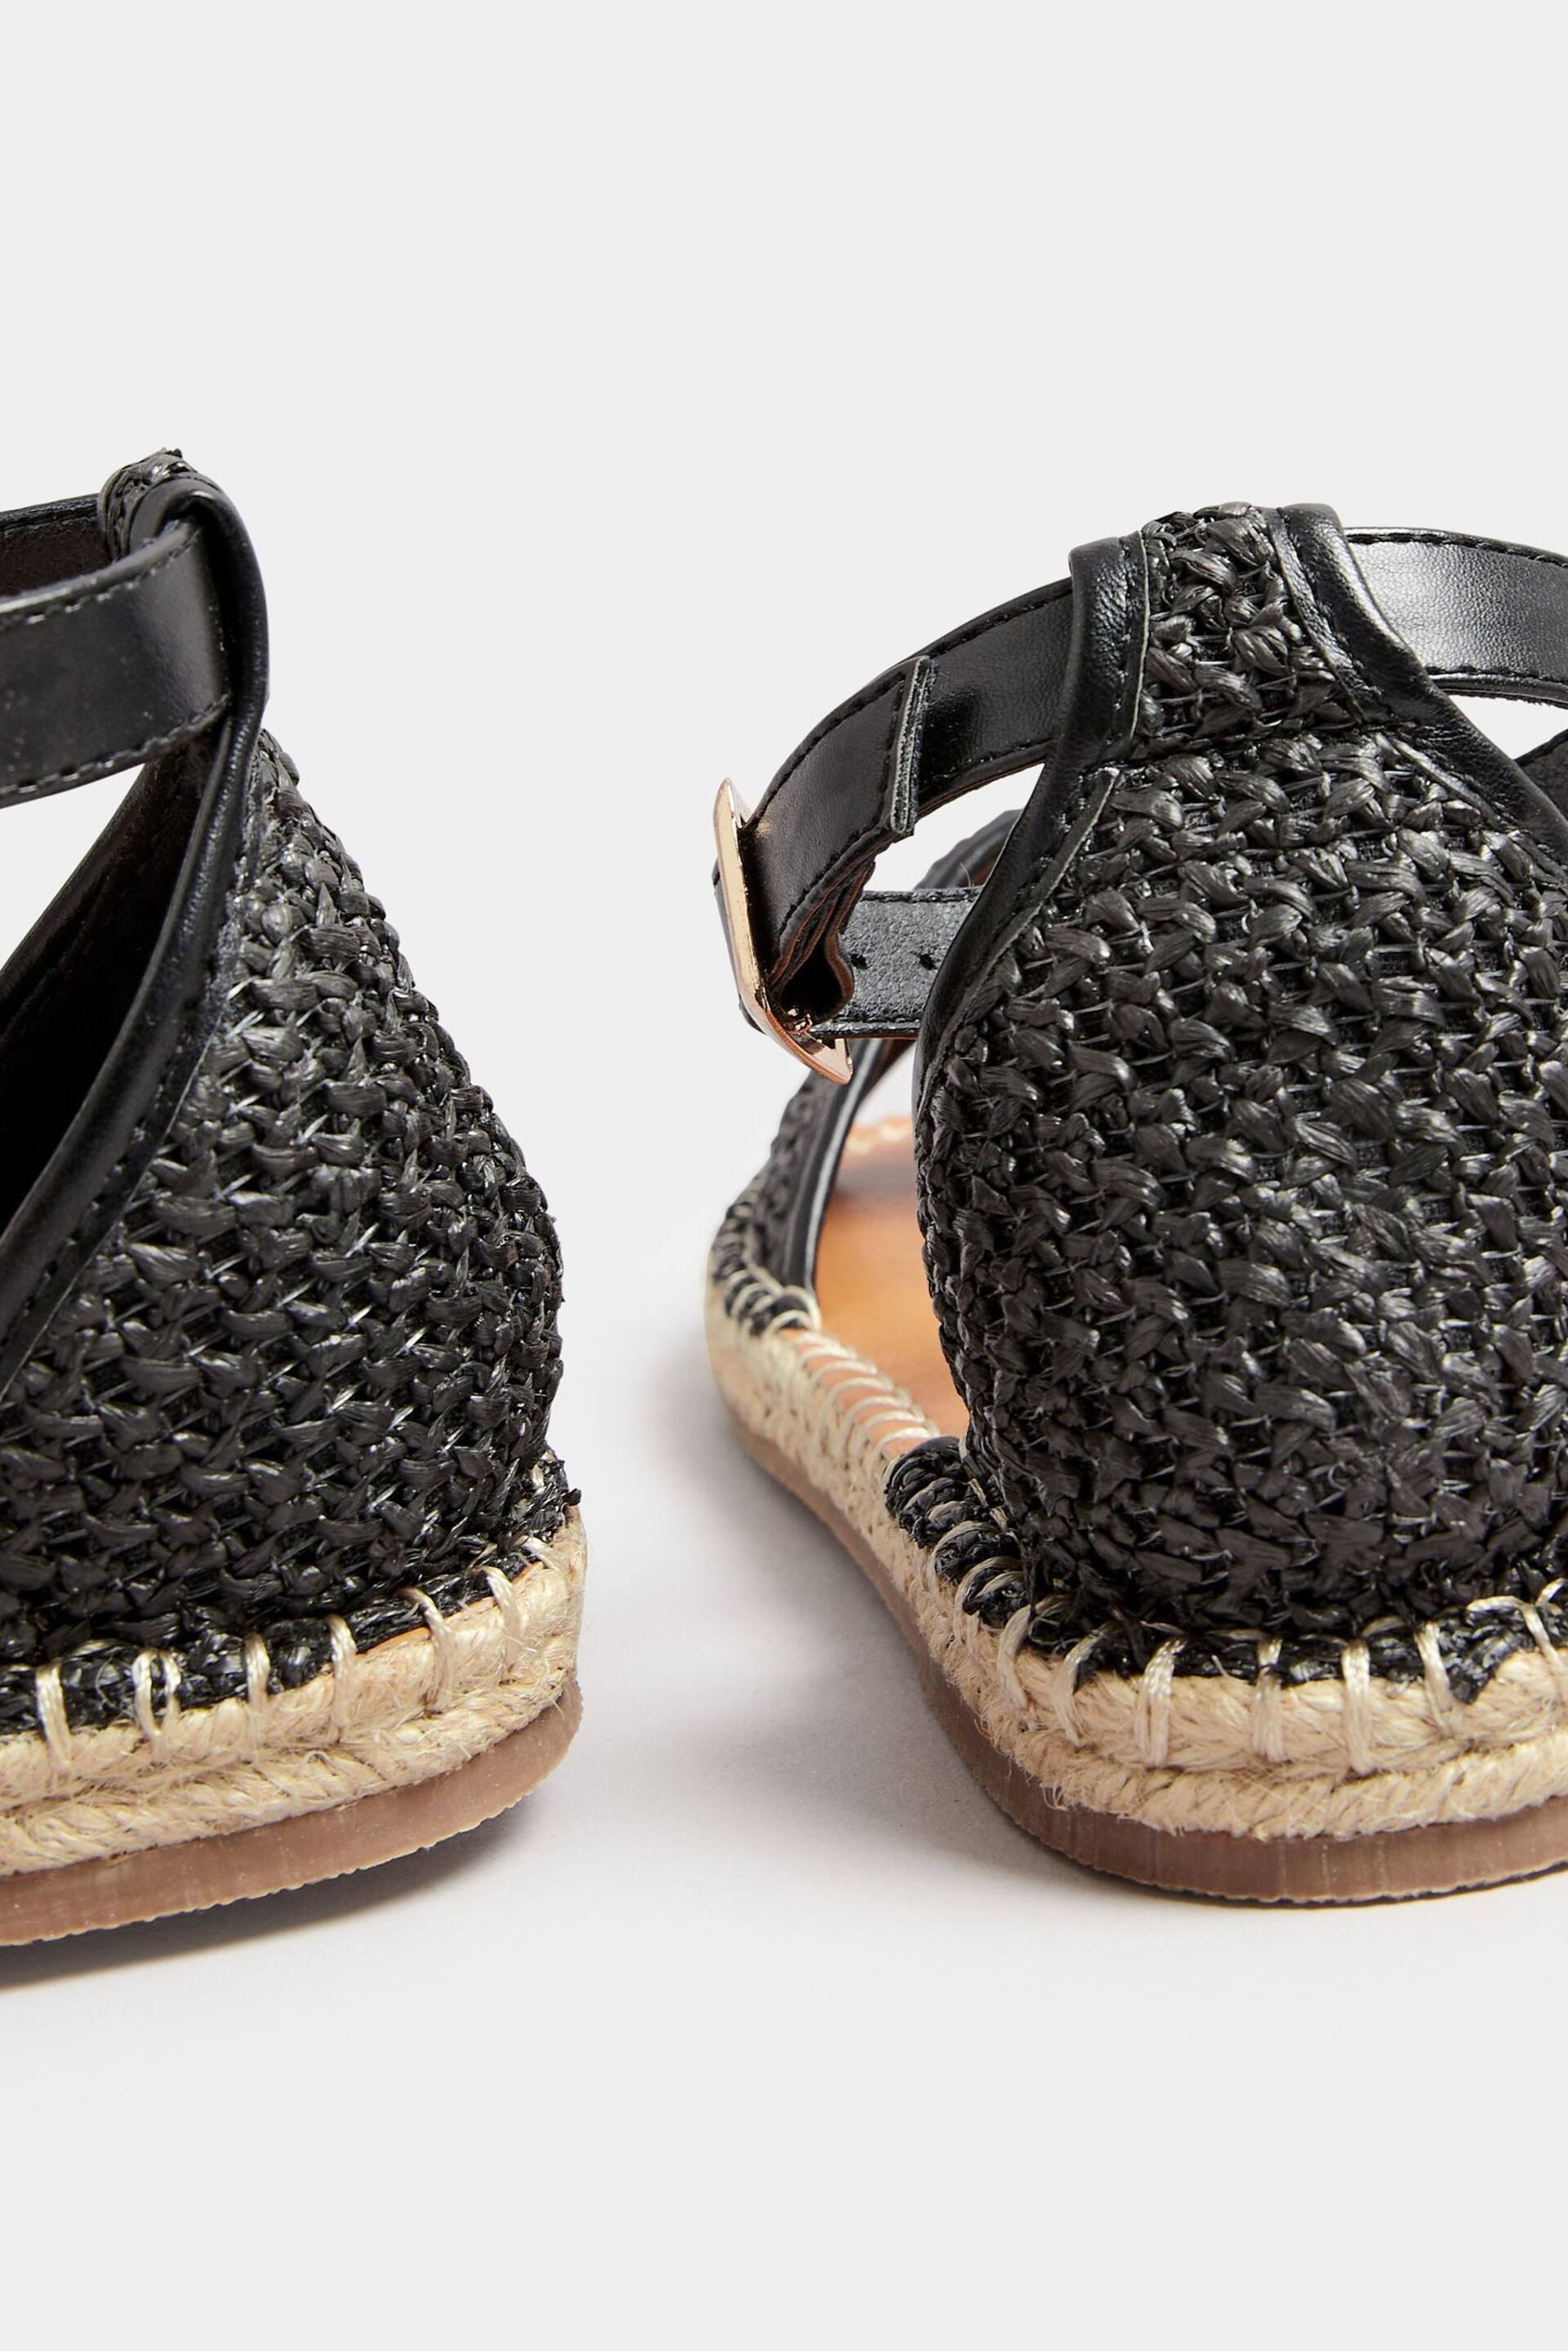 Long Tall Sally Black Espadrille Open Toe Sandals In Standard Fit - Image 3 of 5